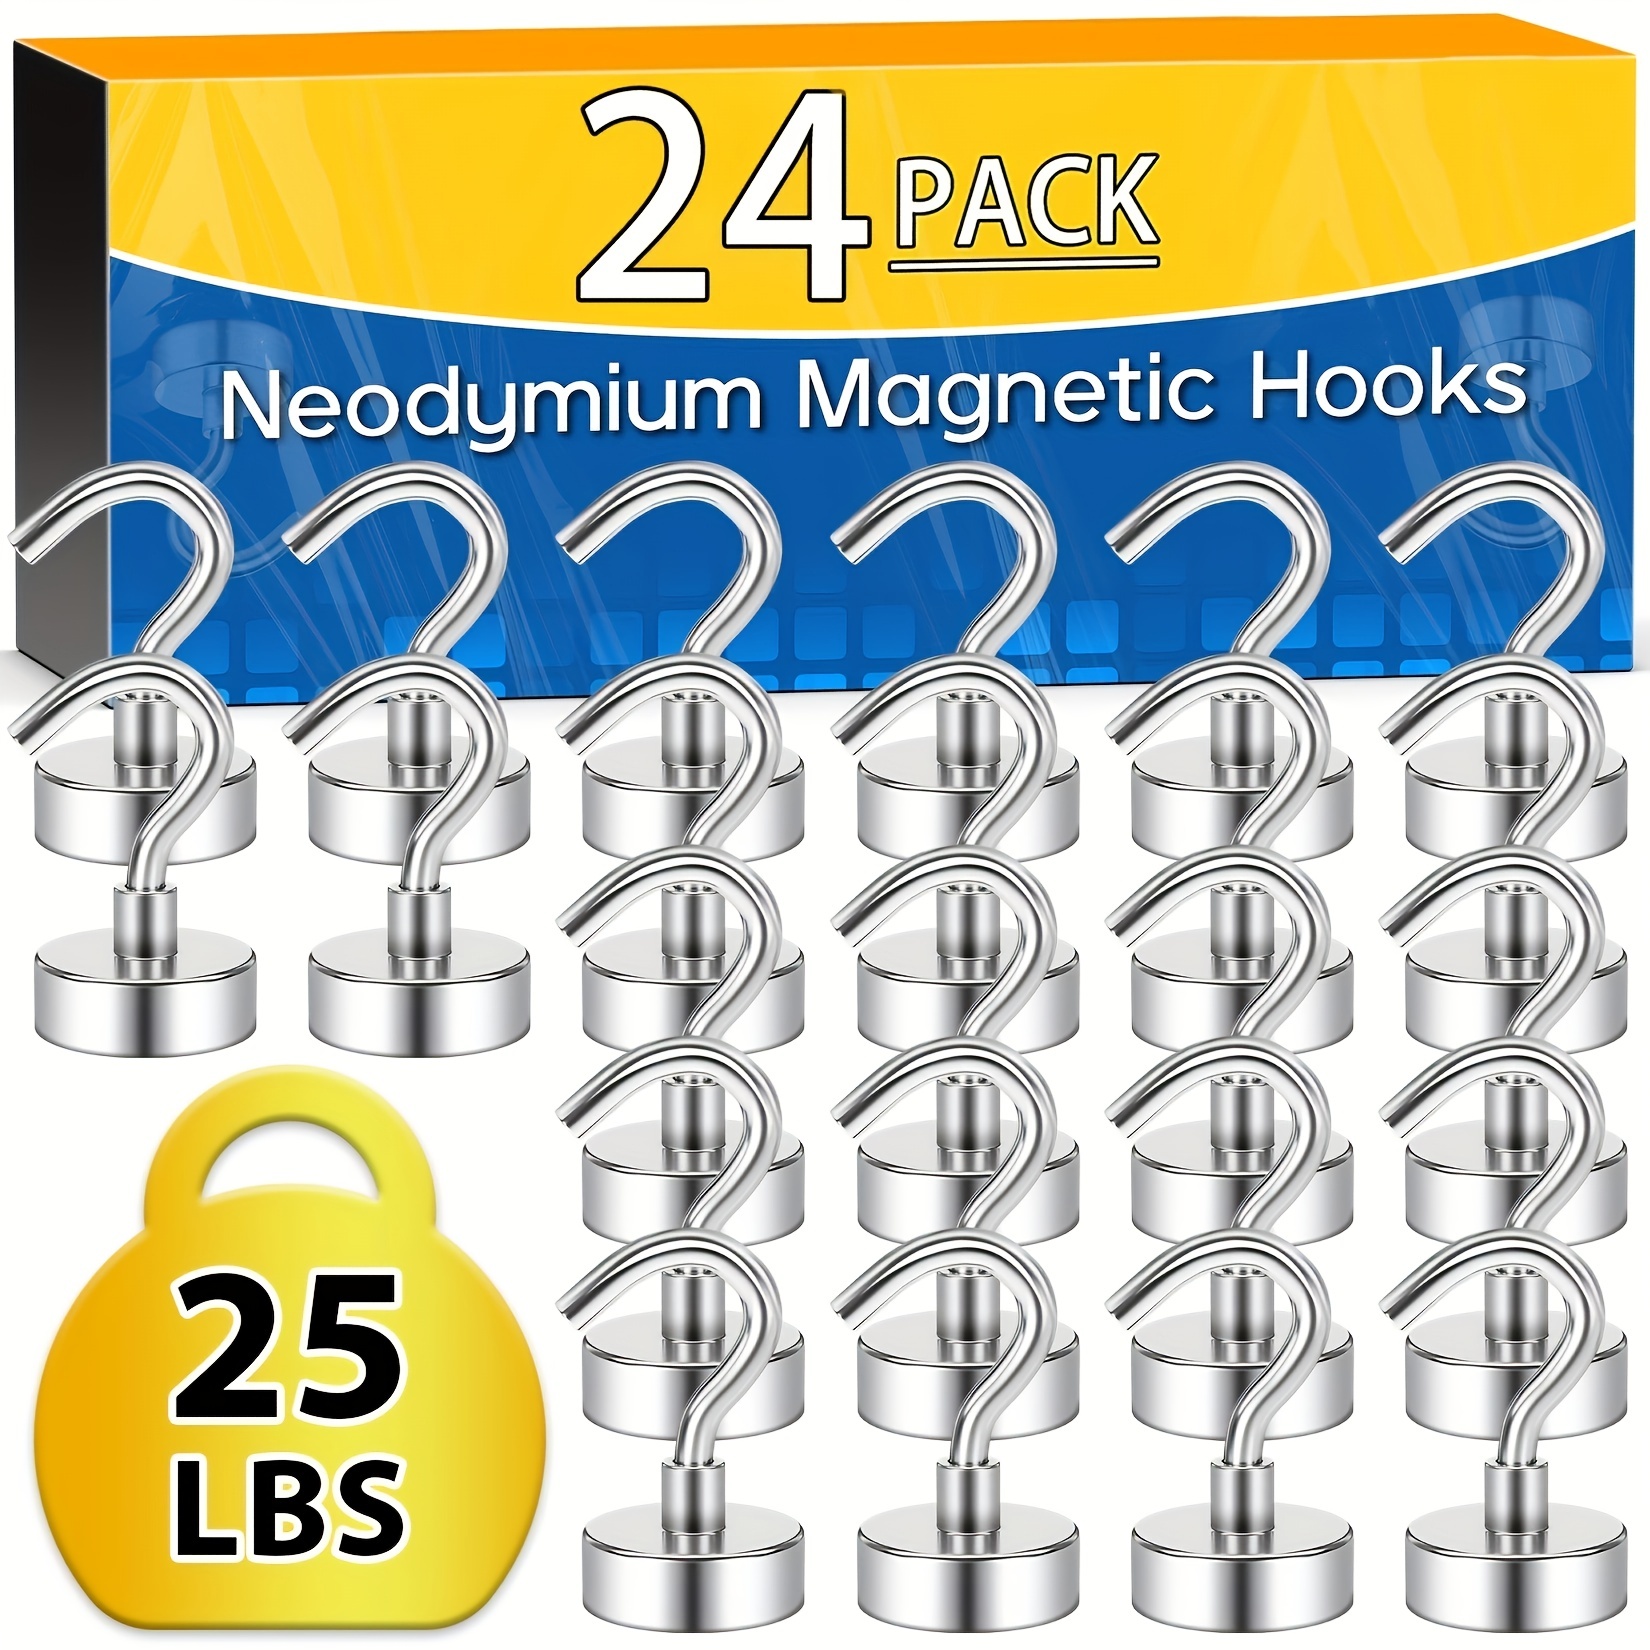 

24pcs, Magnetic Hooks For Hanging, 25lbs Heavy Duty Magnetic Hooks Magnet With Hooks, Neodymium Magnets Hook For Home, Fridge, Whiteboard, Kitchen, Workplace, Kitchen Stuff